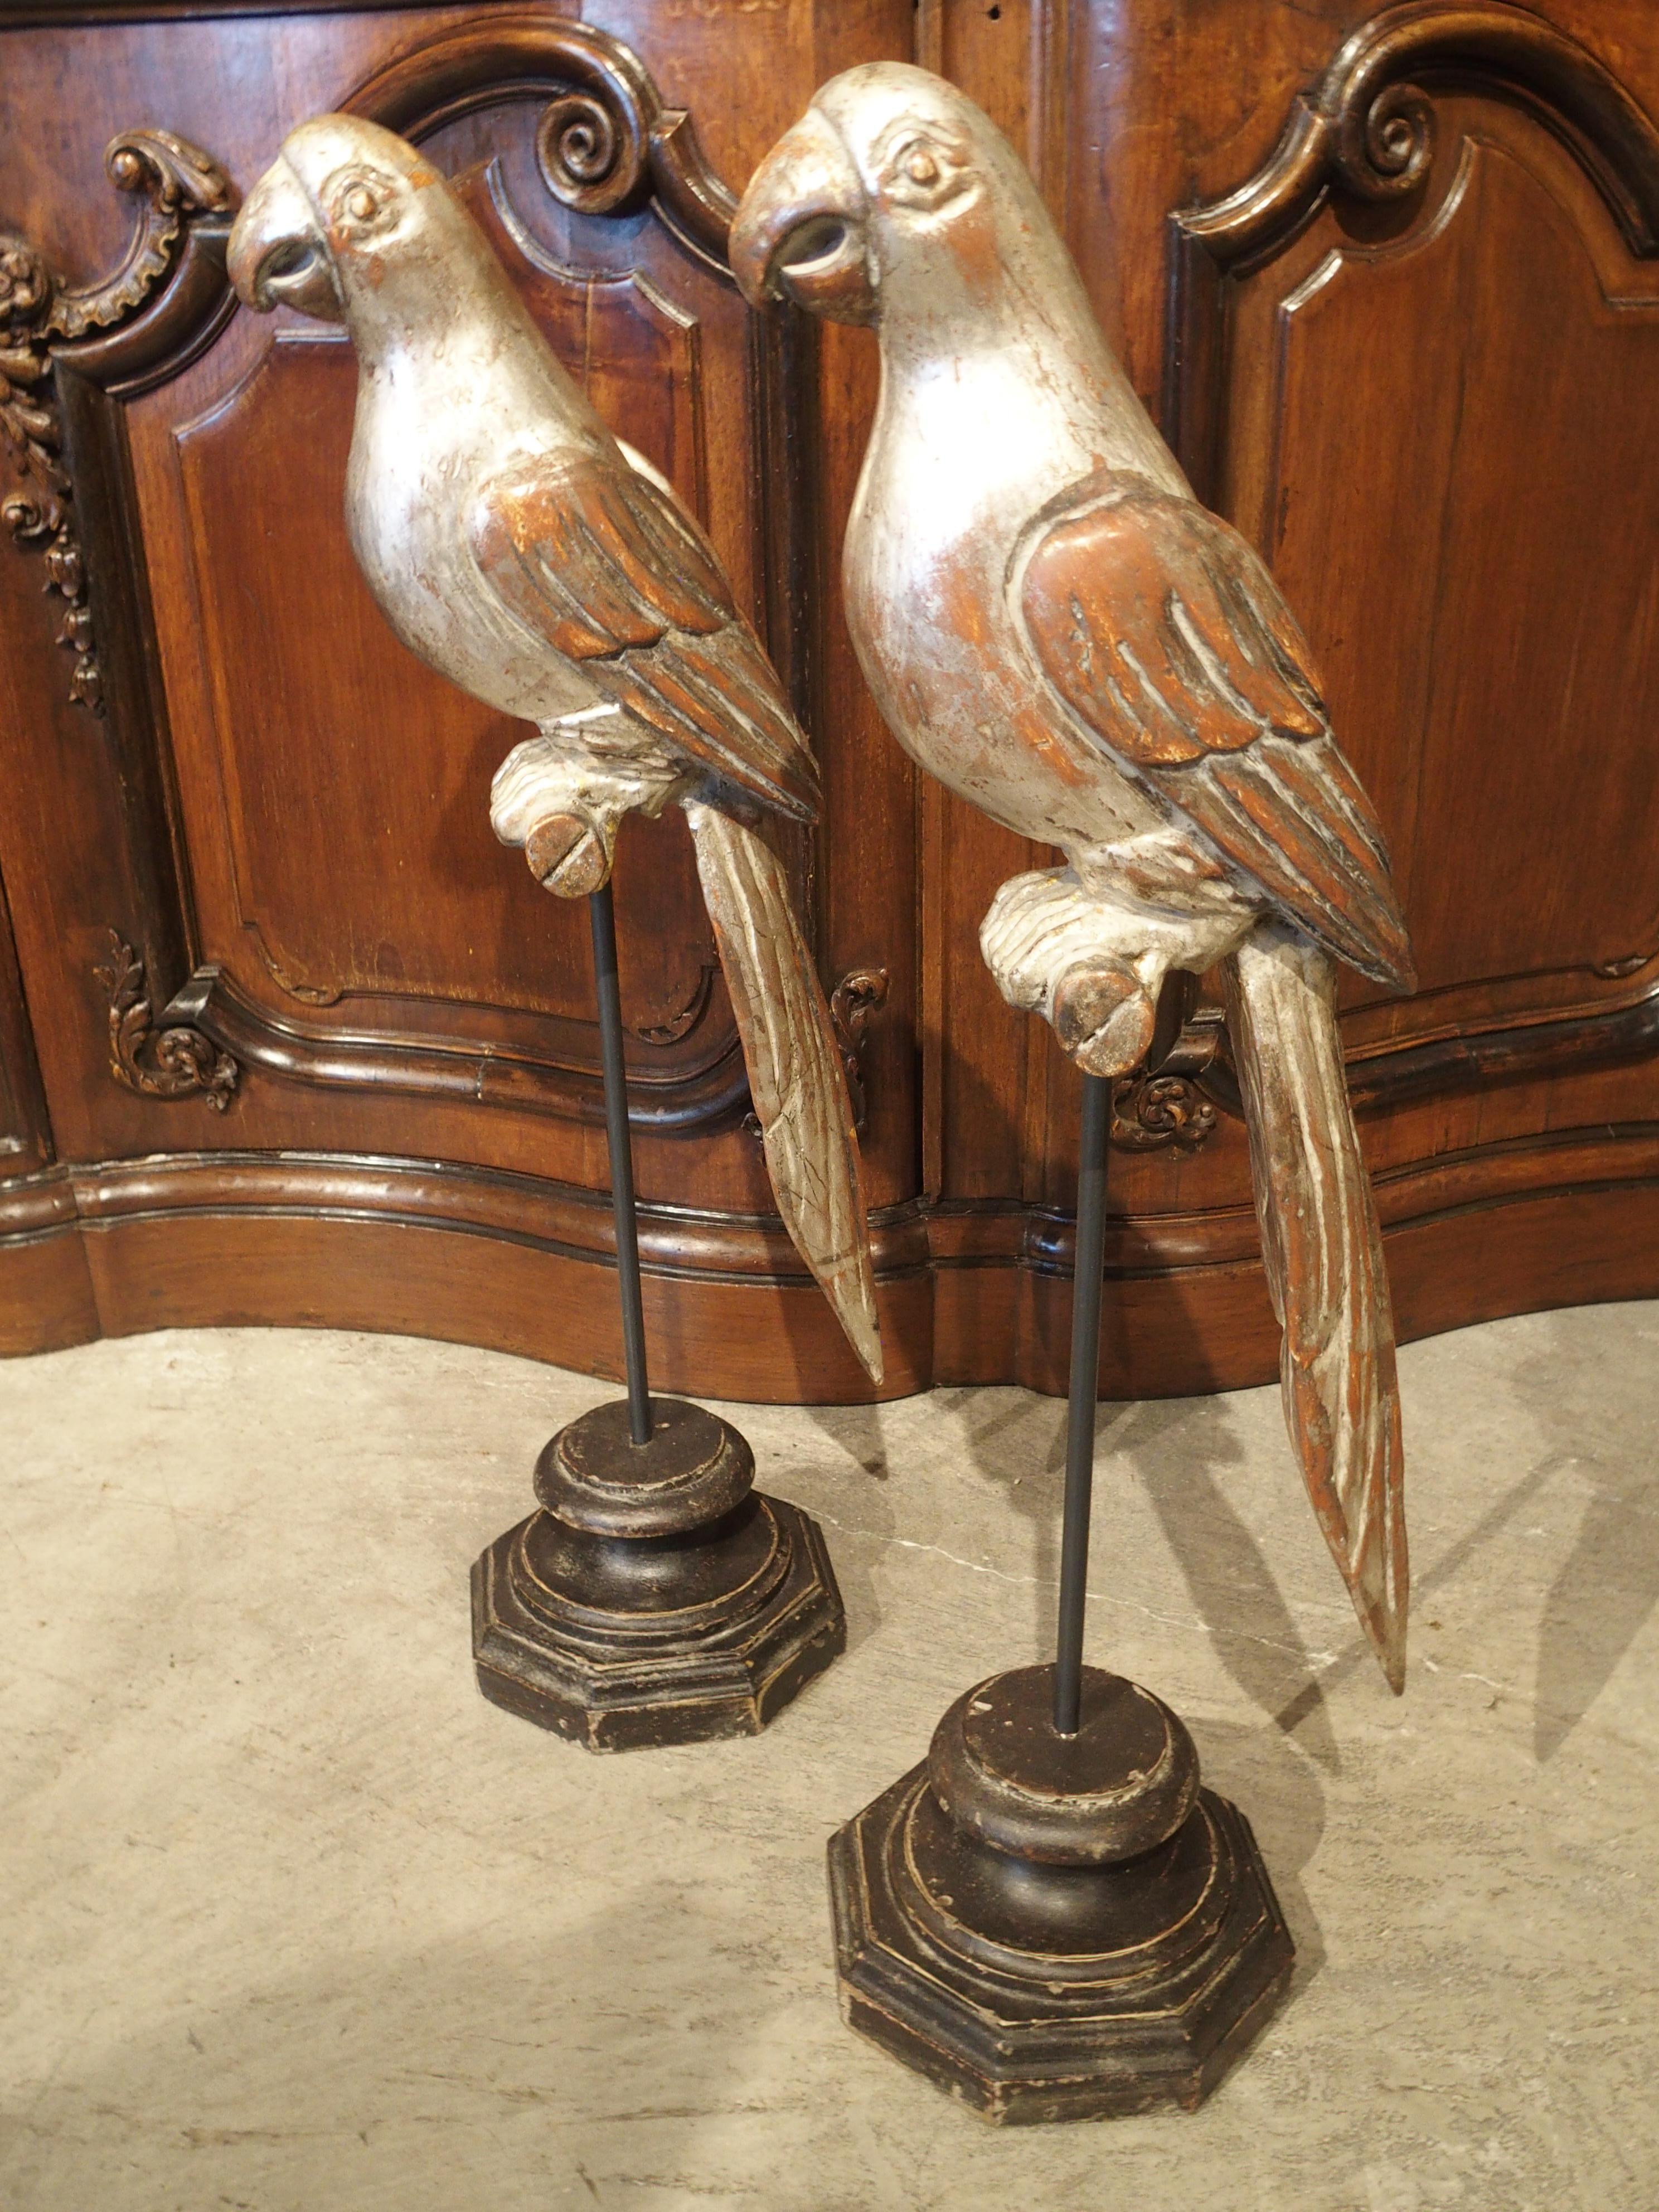 These charming silver gilt parrots stand close to 30 inches high. They are mounted to carved hexagonal and wooden painted bases via a small iron rod. The birds rest on small silvered round perches, which are connected to the rods. Wonderful as